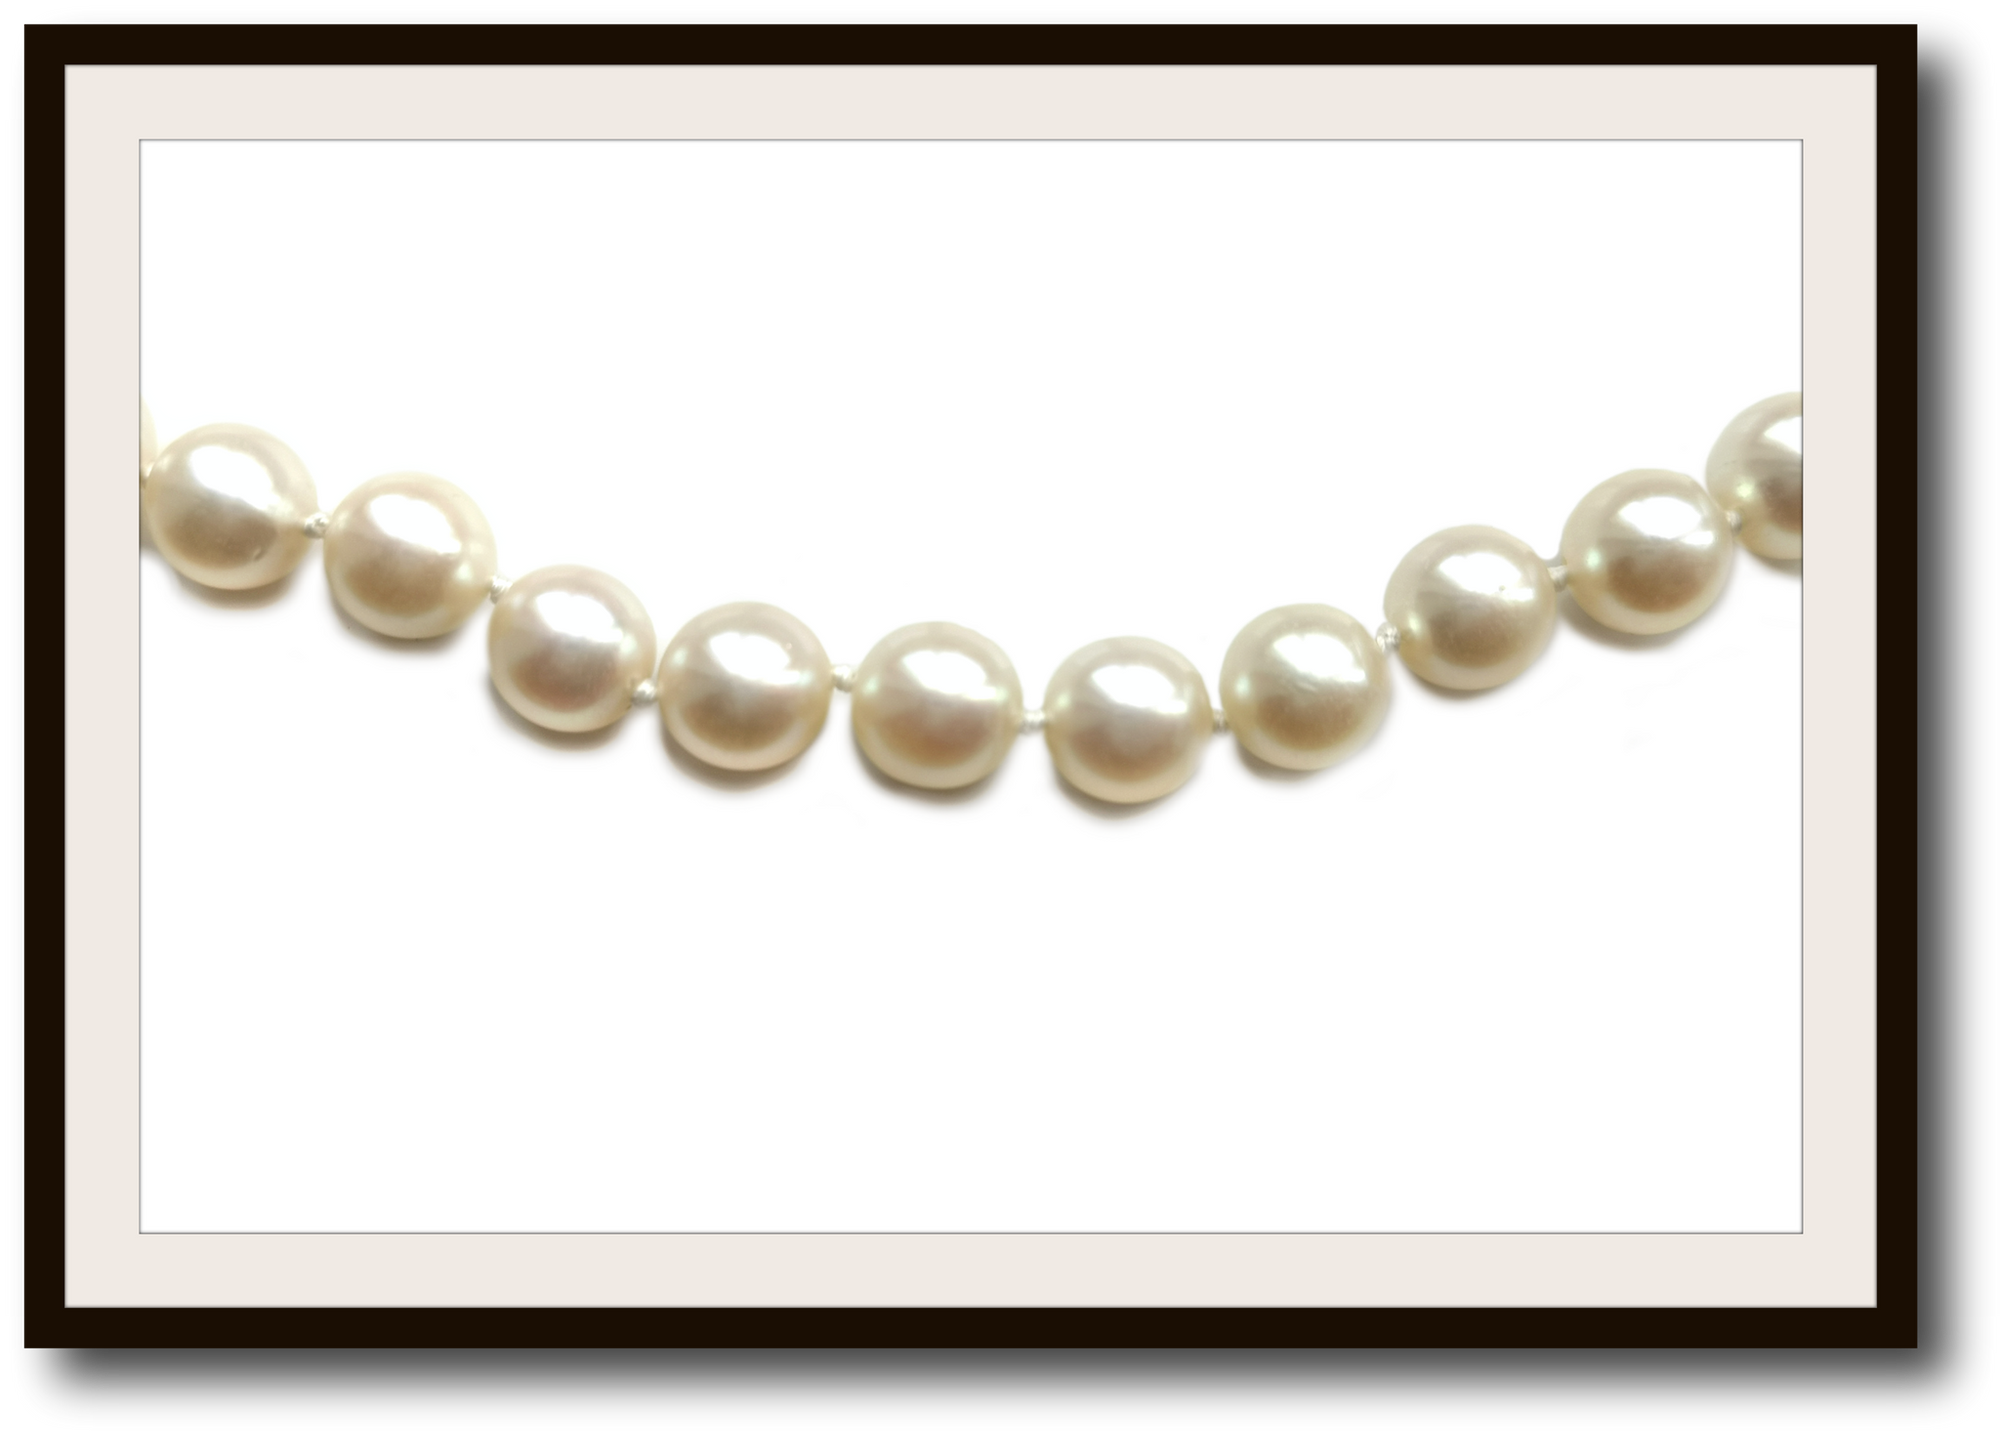 Vintage Hand Knotted Akoya 7mm 18k Gold Cultured Pearl Necklace 18 in